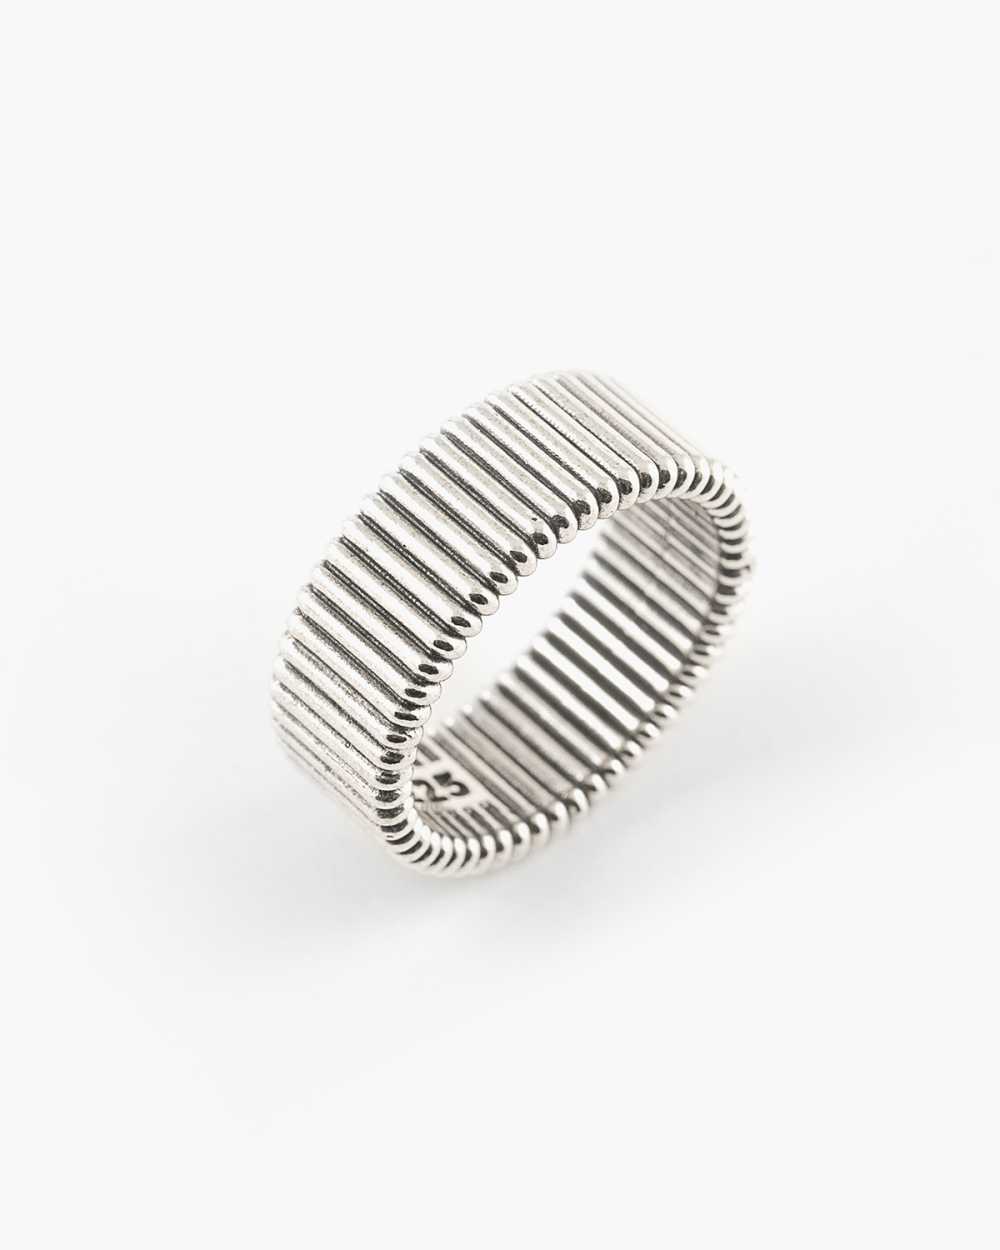 MOTHERBOARD BAND RING